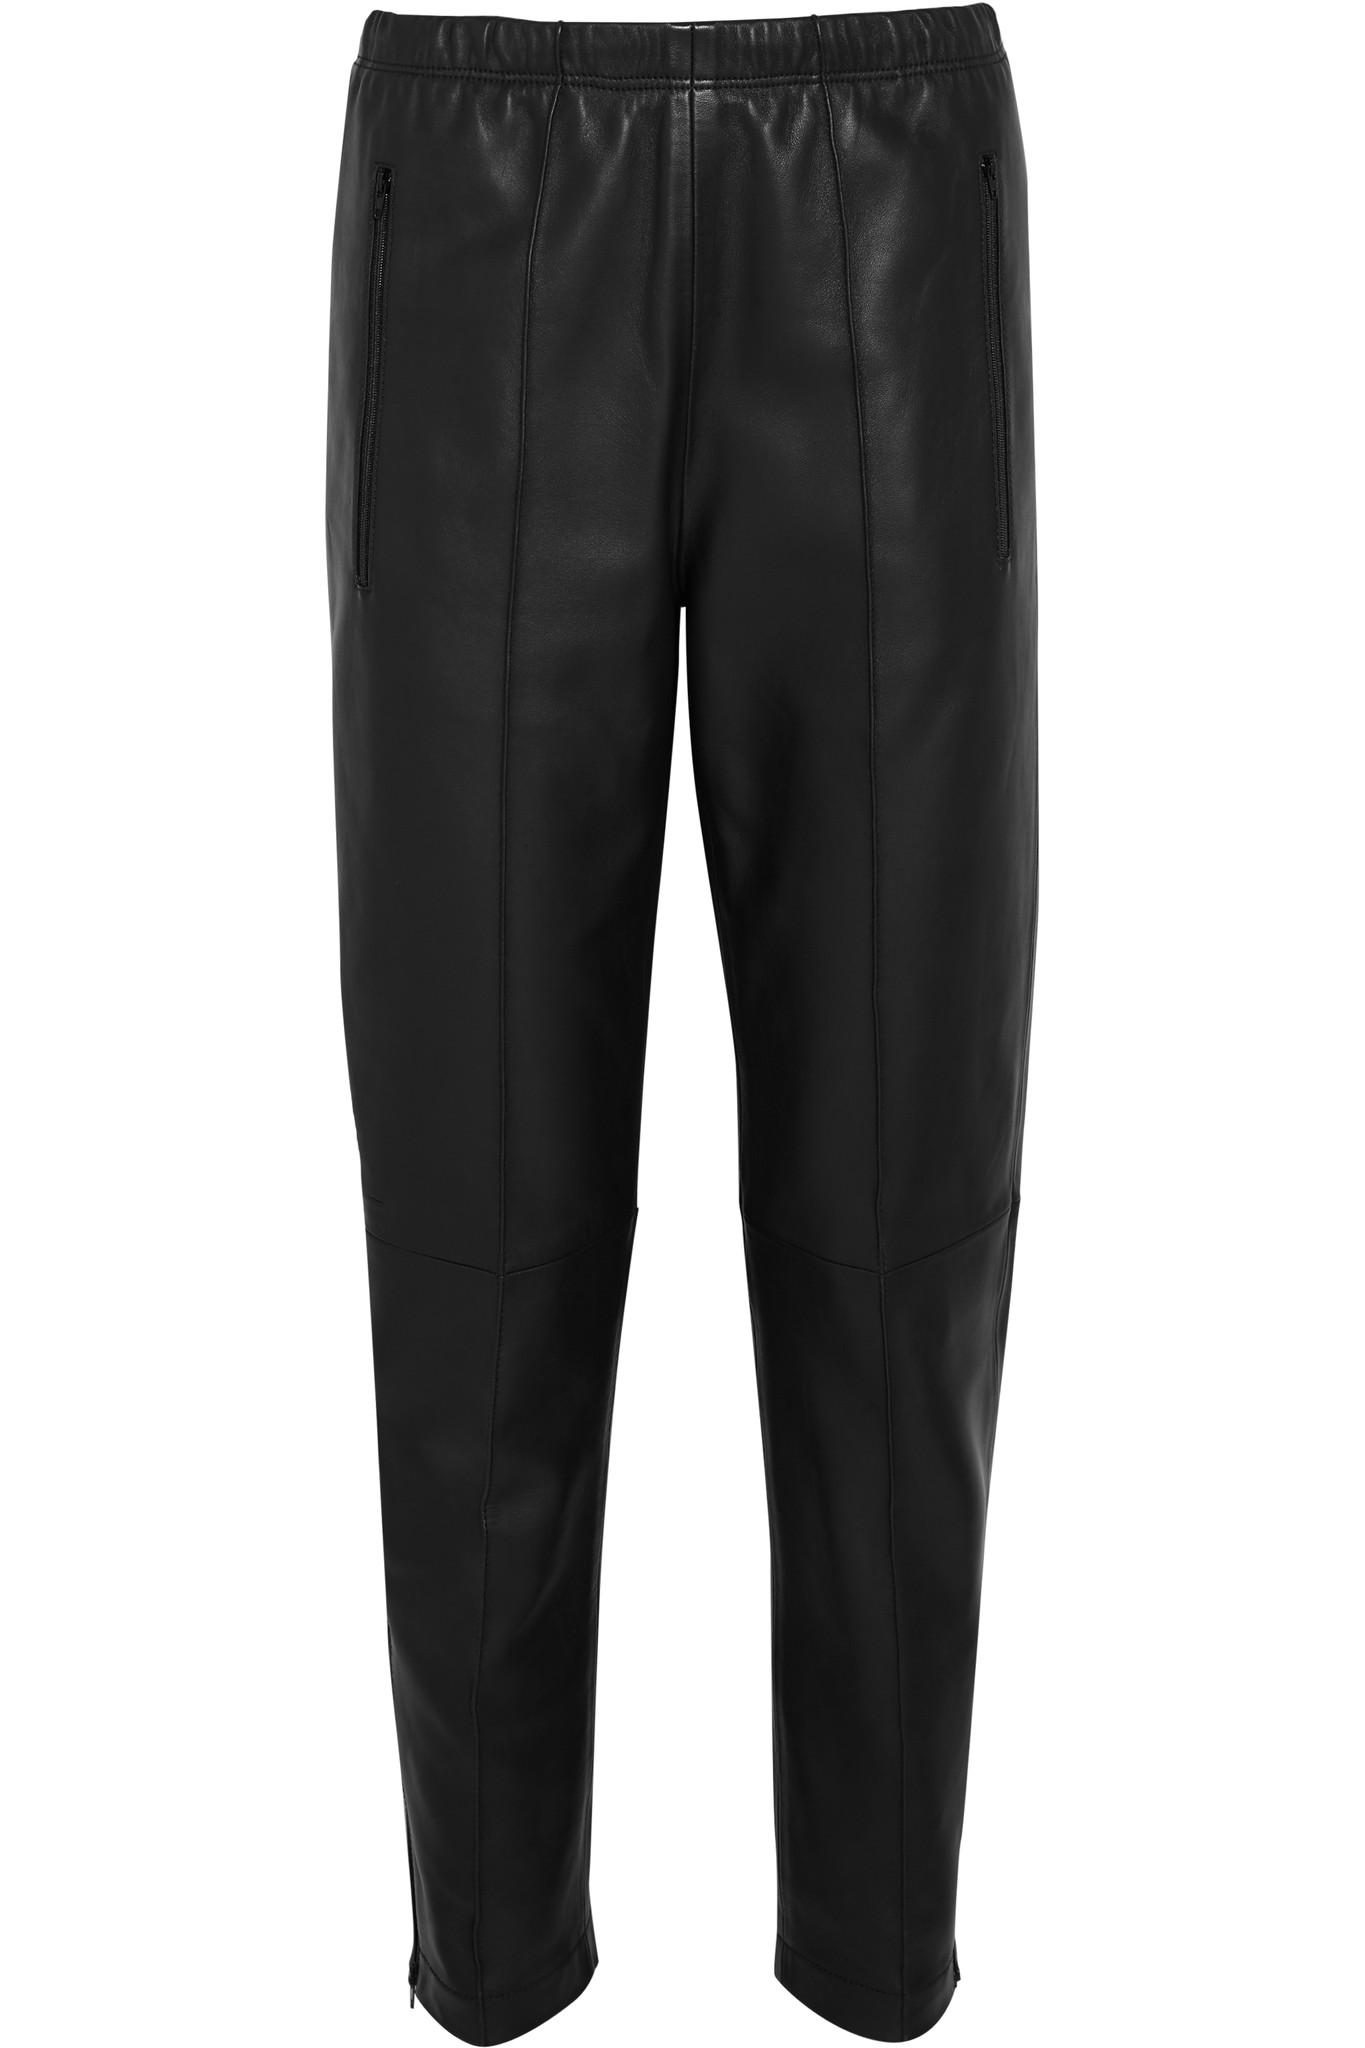 Balenciaga Leather Track Pants in Black - Lyst